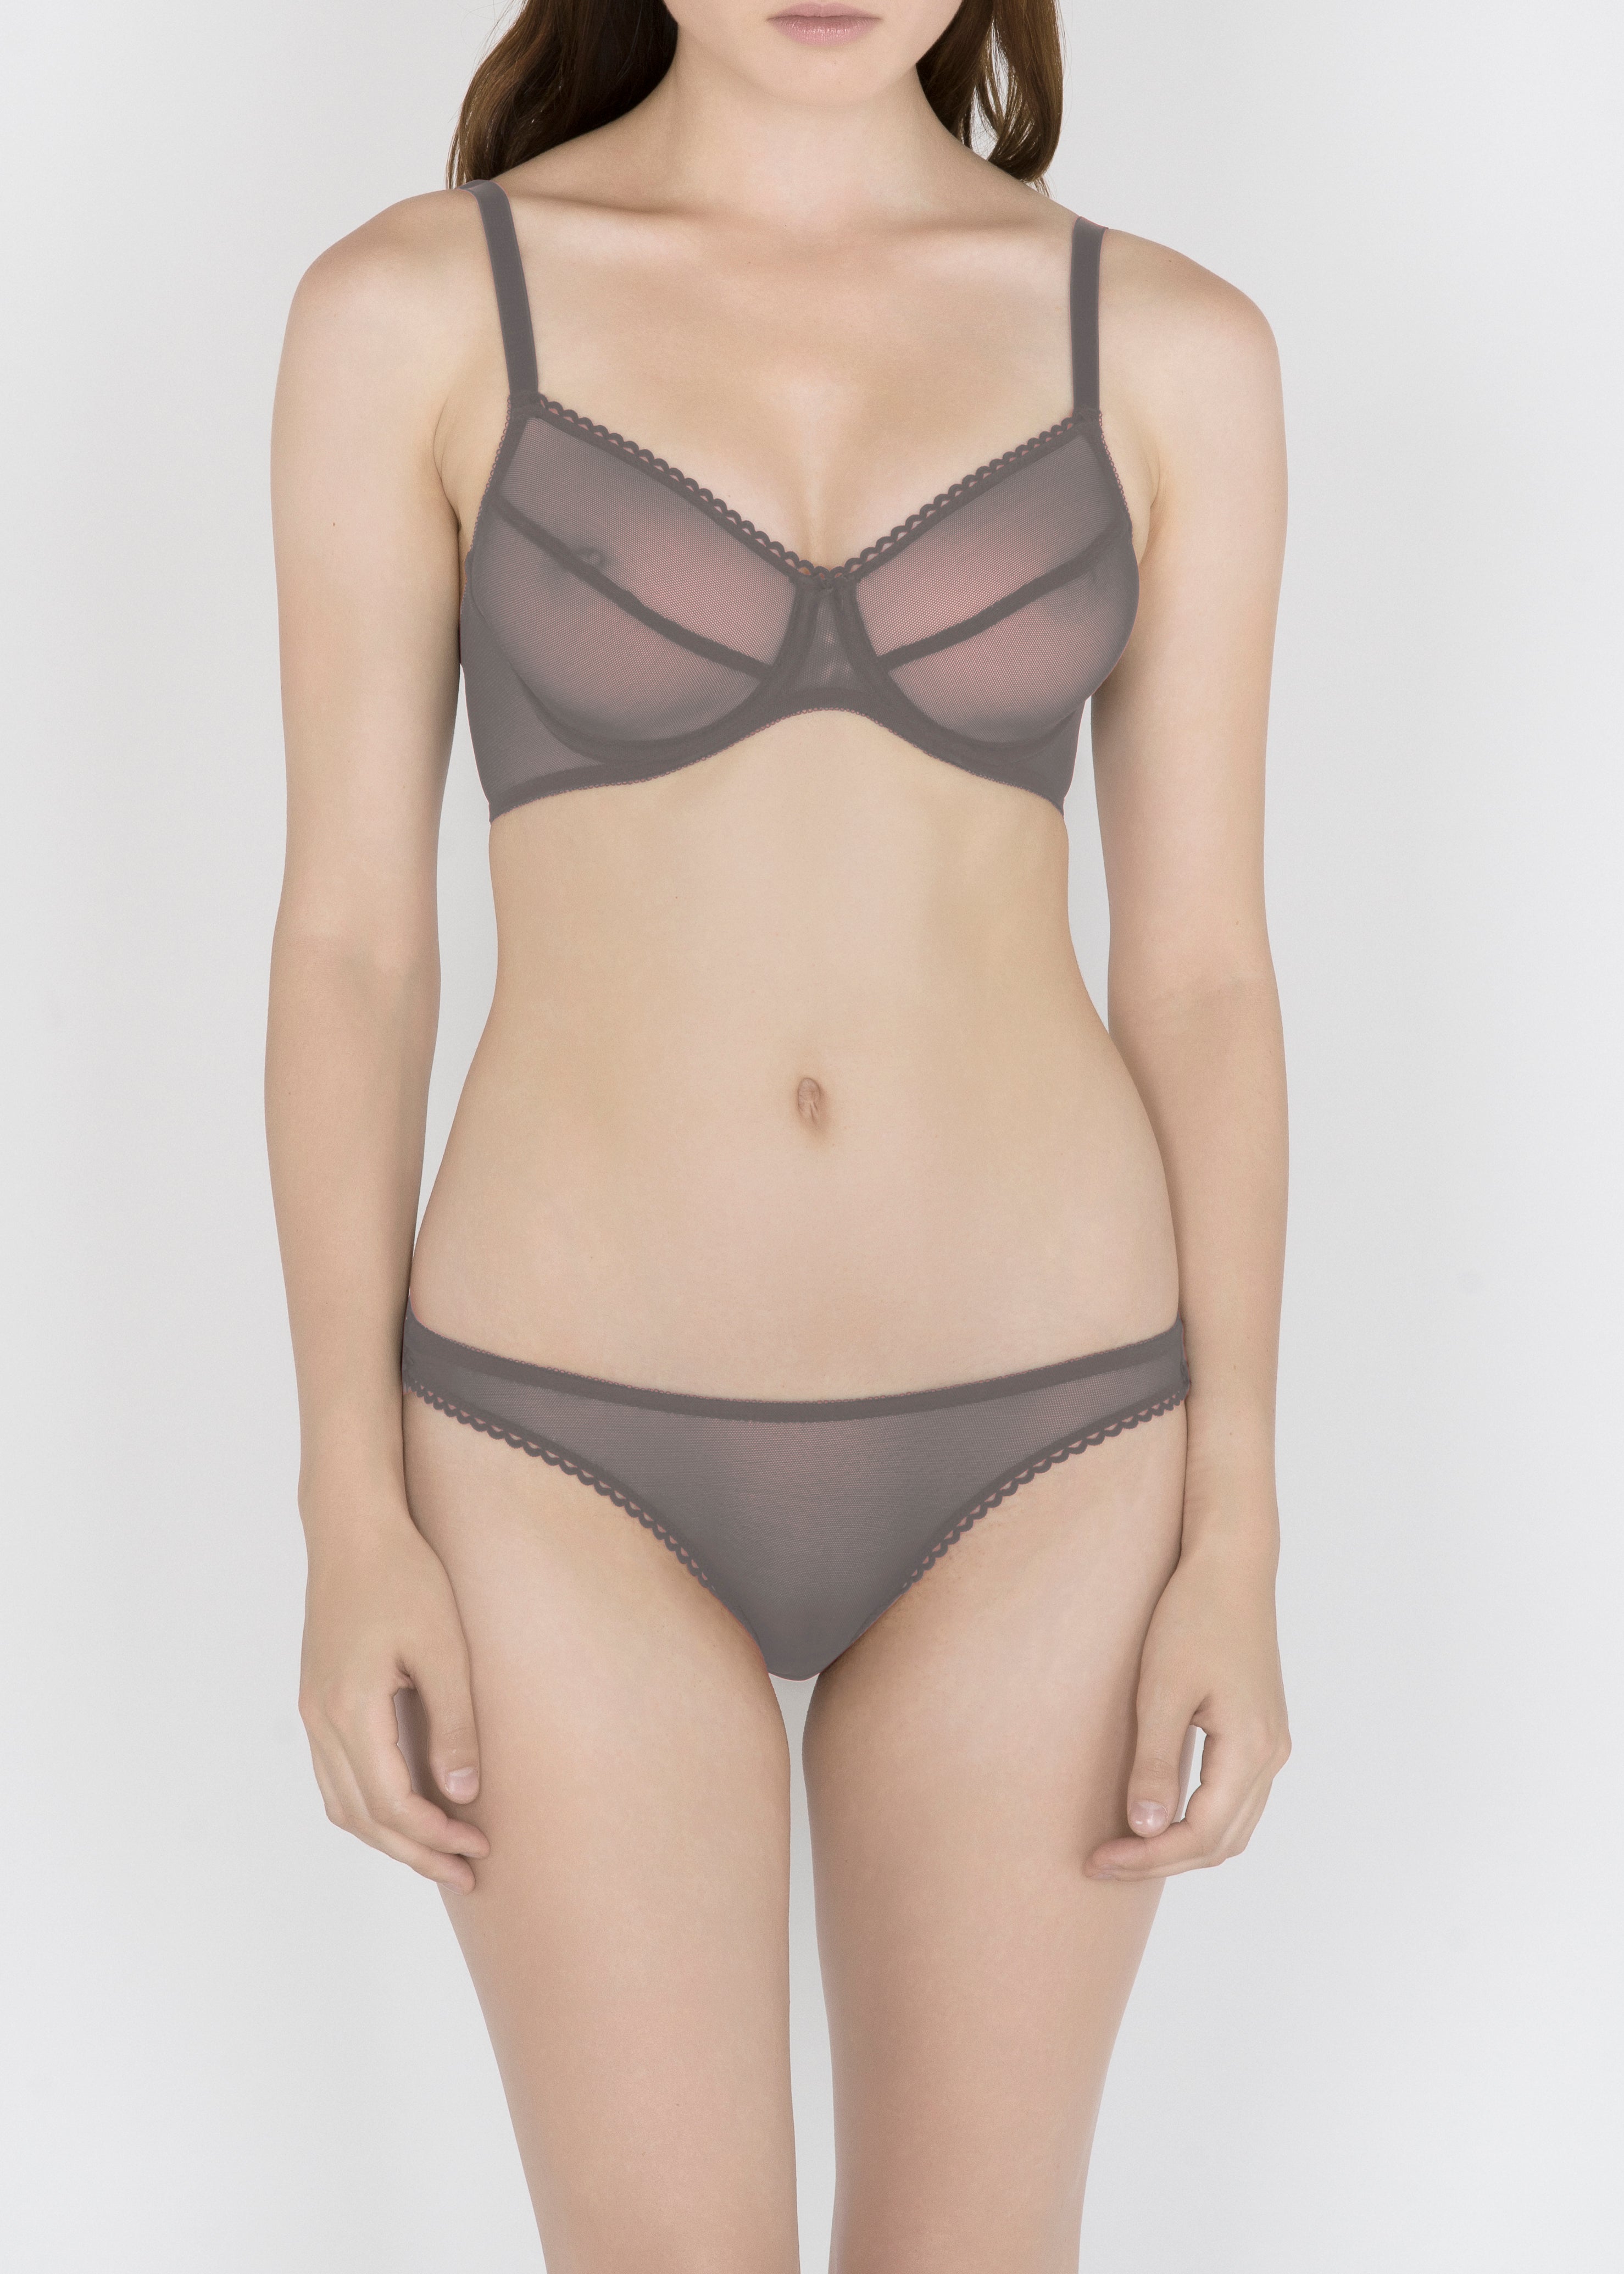 Sheer French Tulle Basic Bra in Autumn Colors